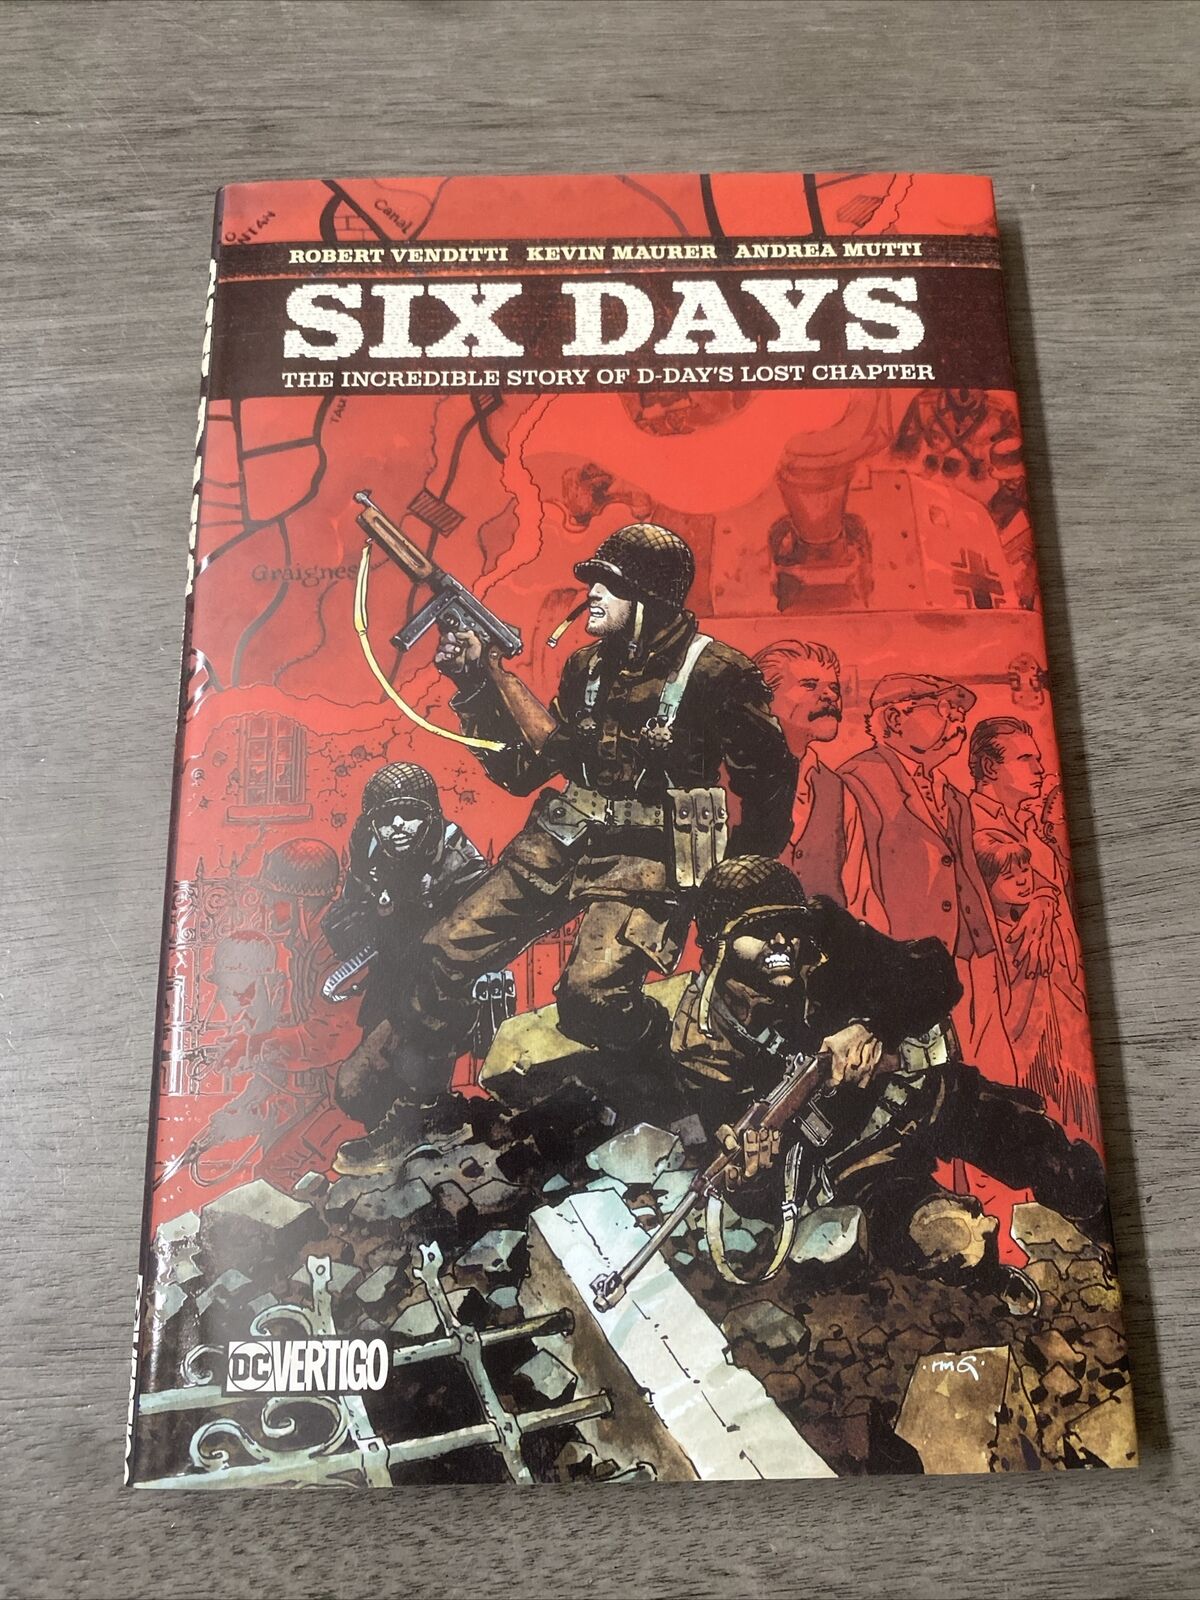 Six Days: The Incredible Story of D-Day's Lost Chapter (DC Comics, Hardcover)